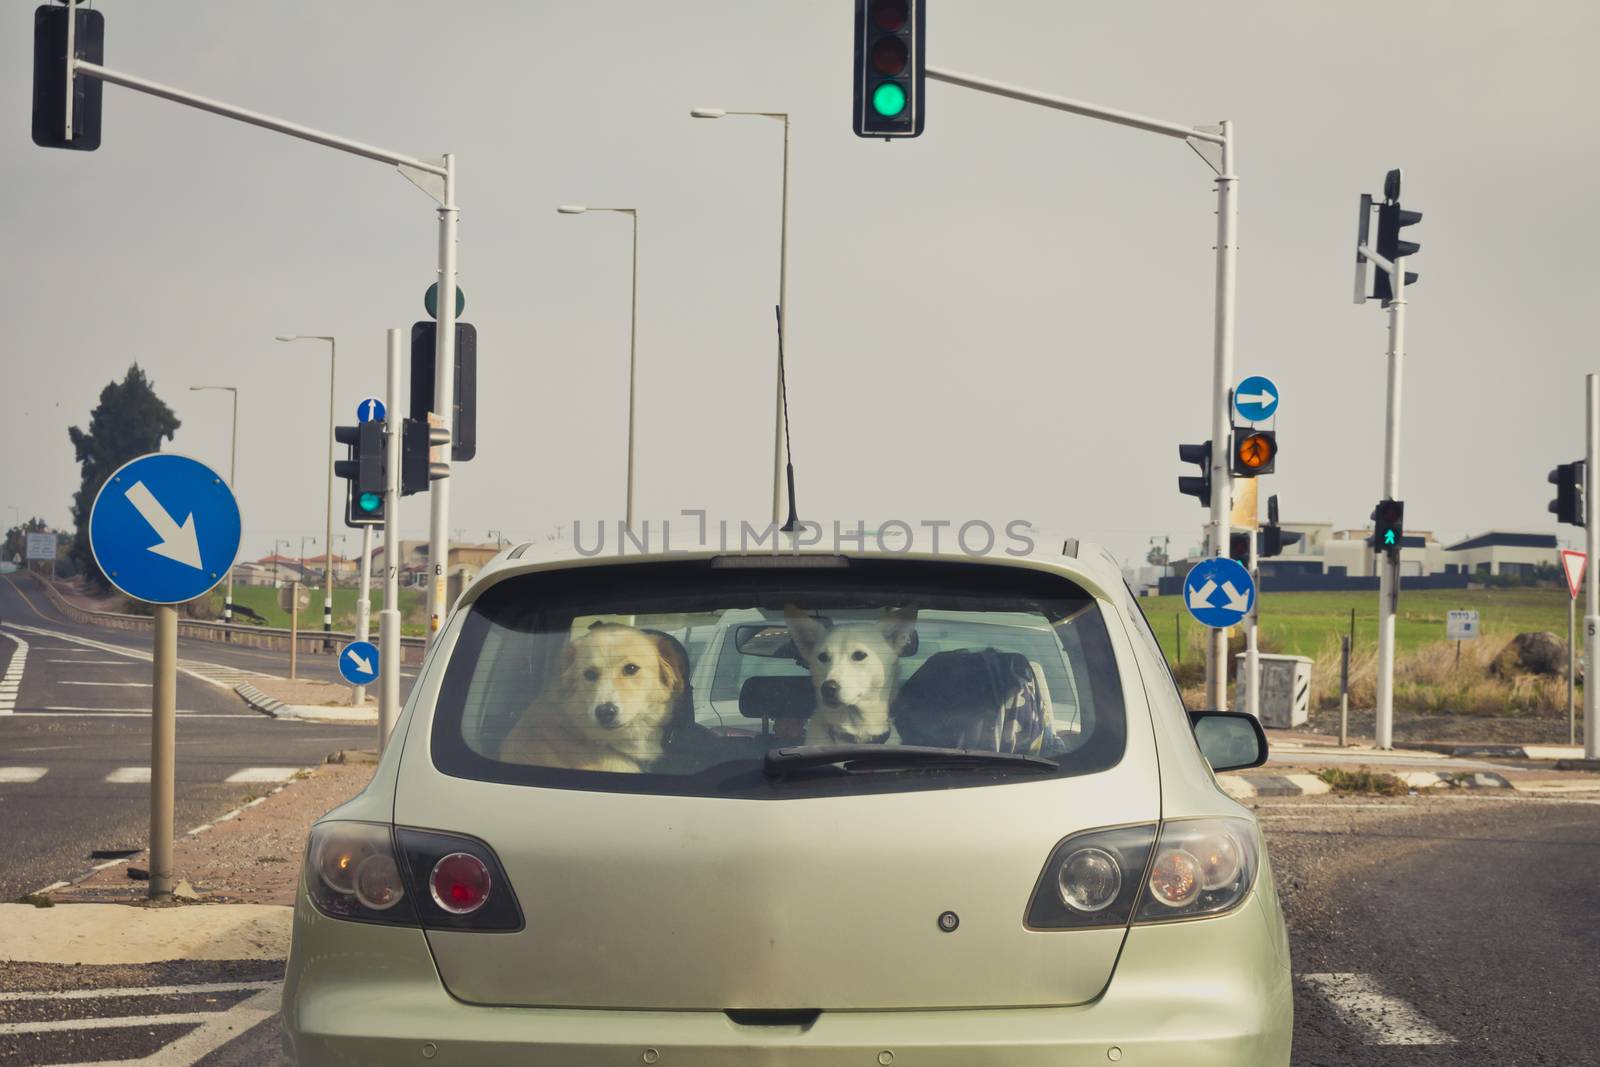 Two dogs behind the rear car window.